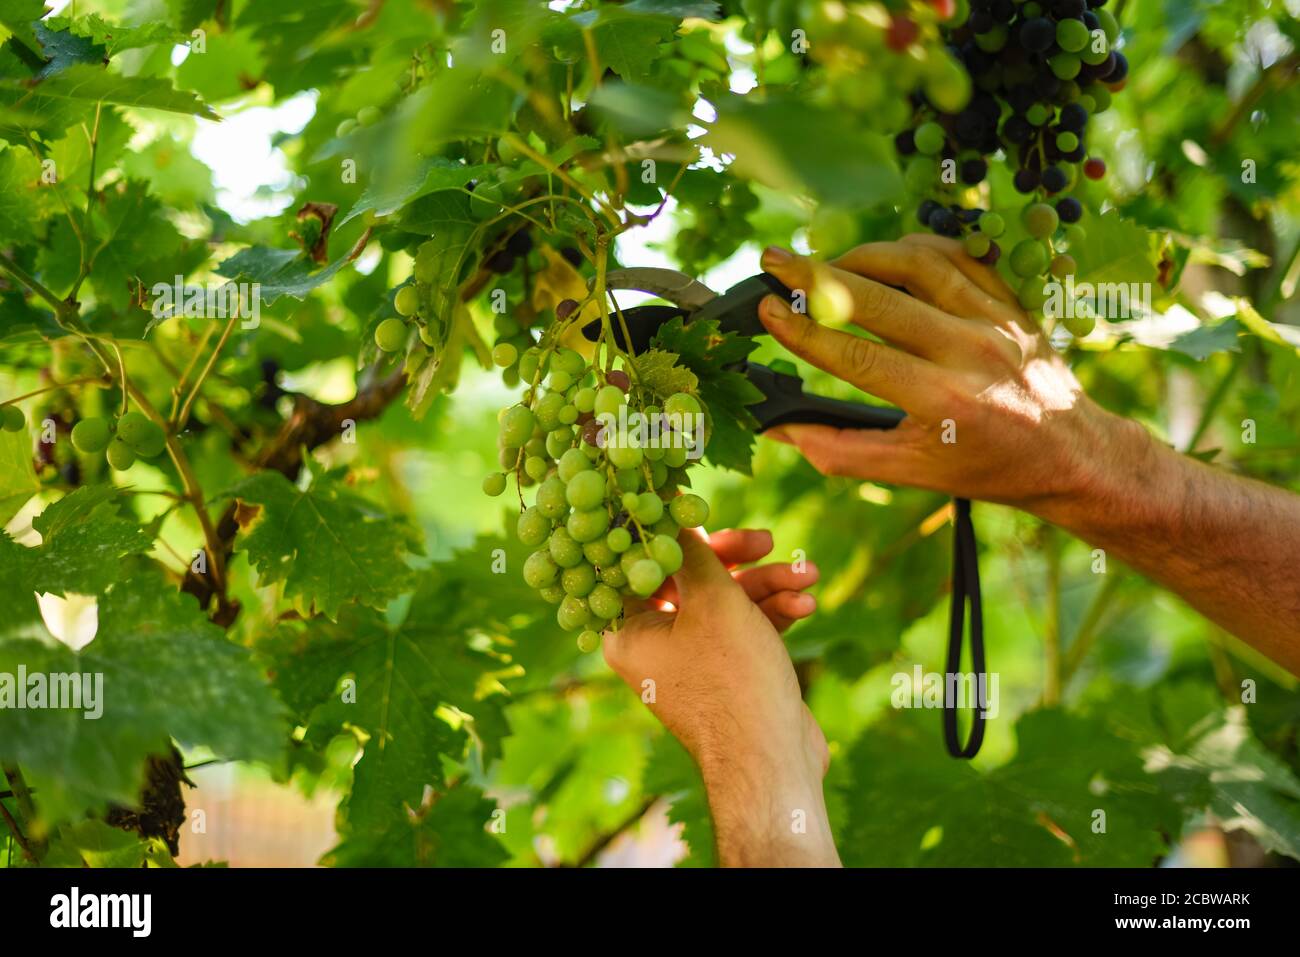 Male hand holding and cutting the grape leaf with garden scissors making the room for the ripened bunch of juicy and delicious white grape cluster Stock Photo